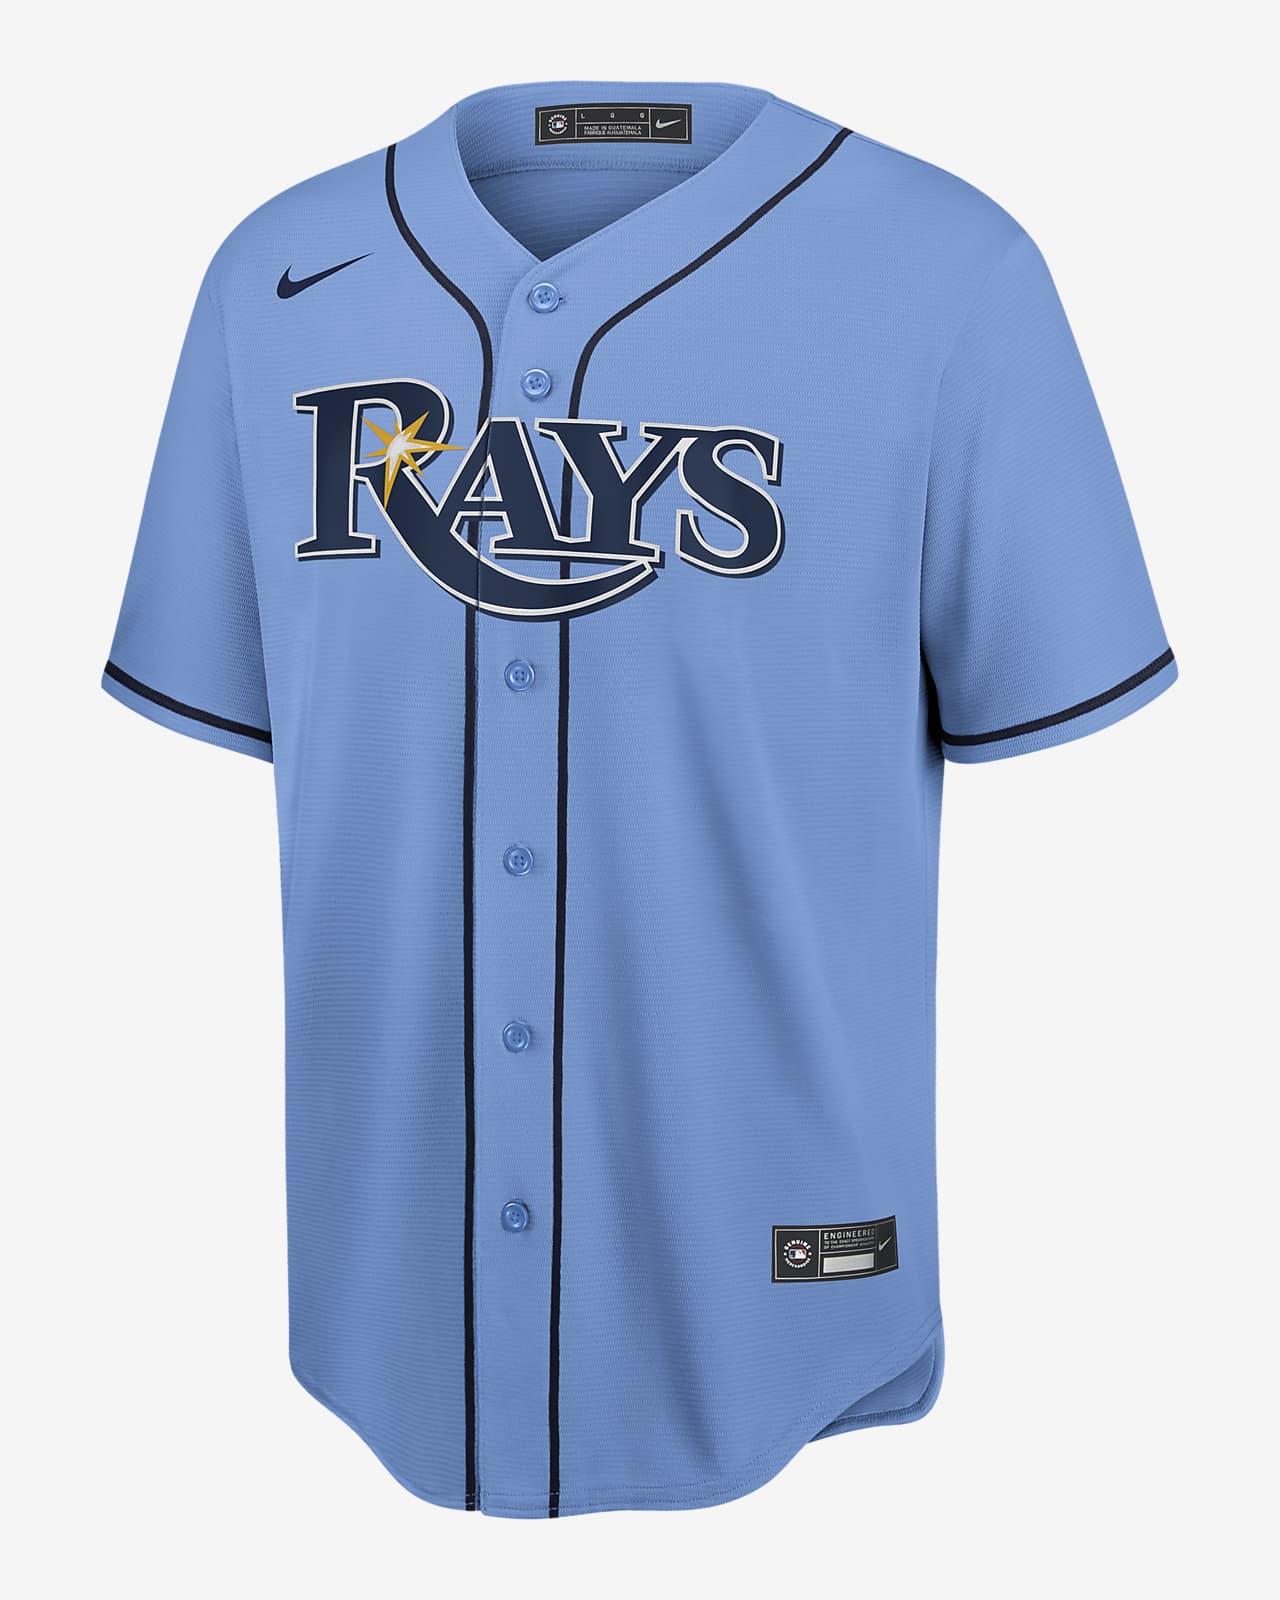 tampa bay rays youth jersey